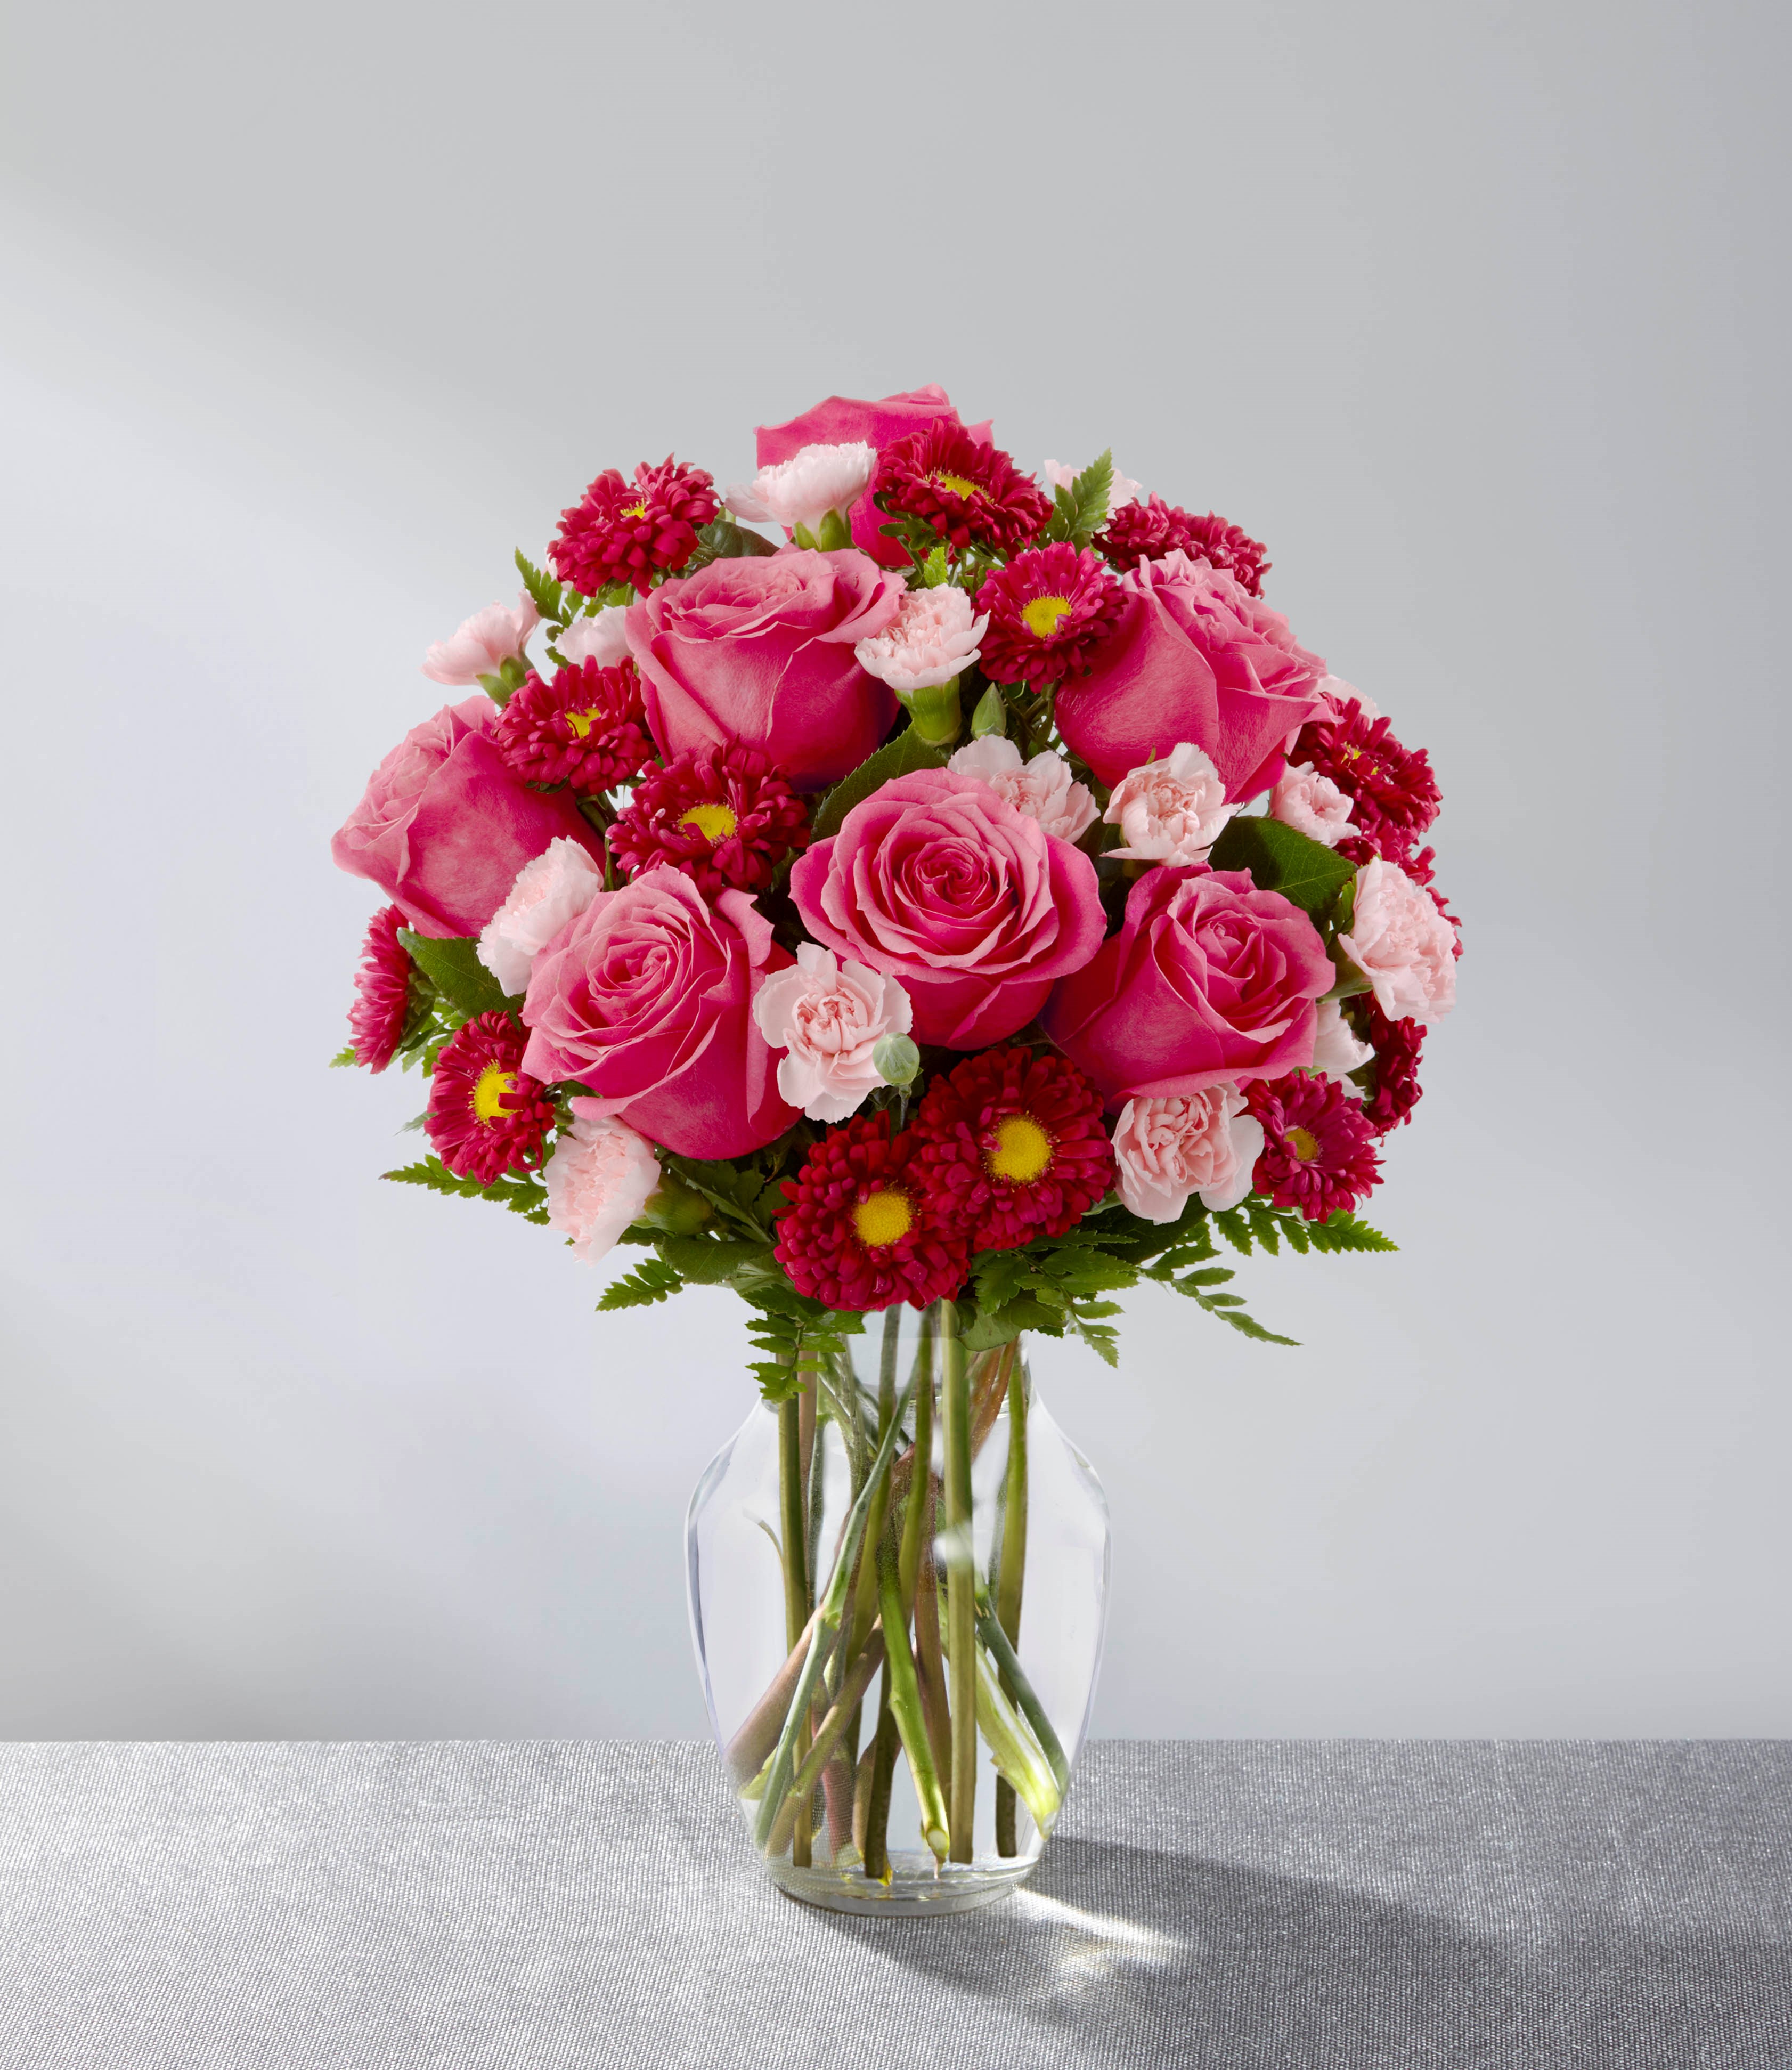 The Precious Heart Bouquet by FTD